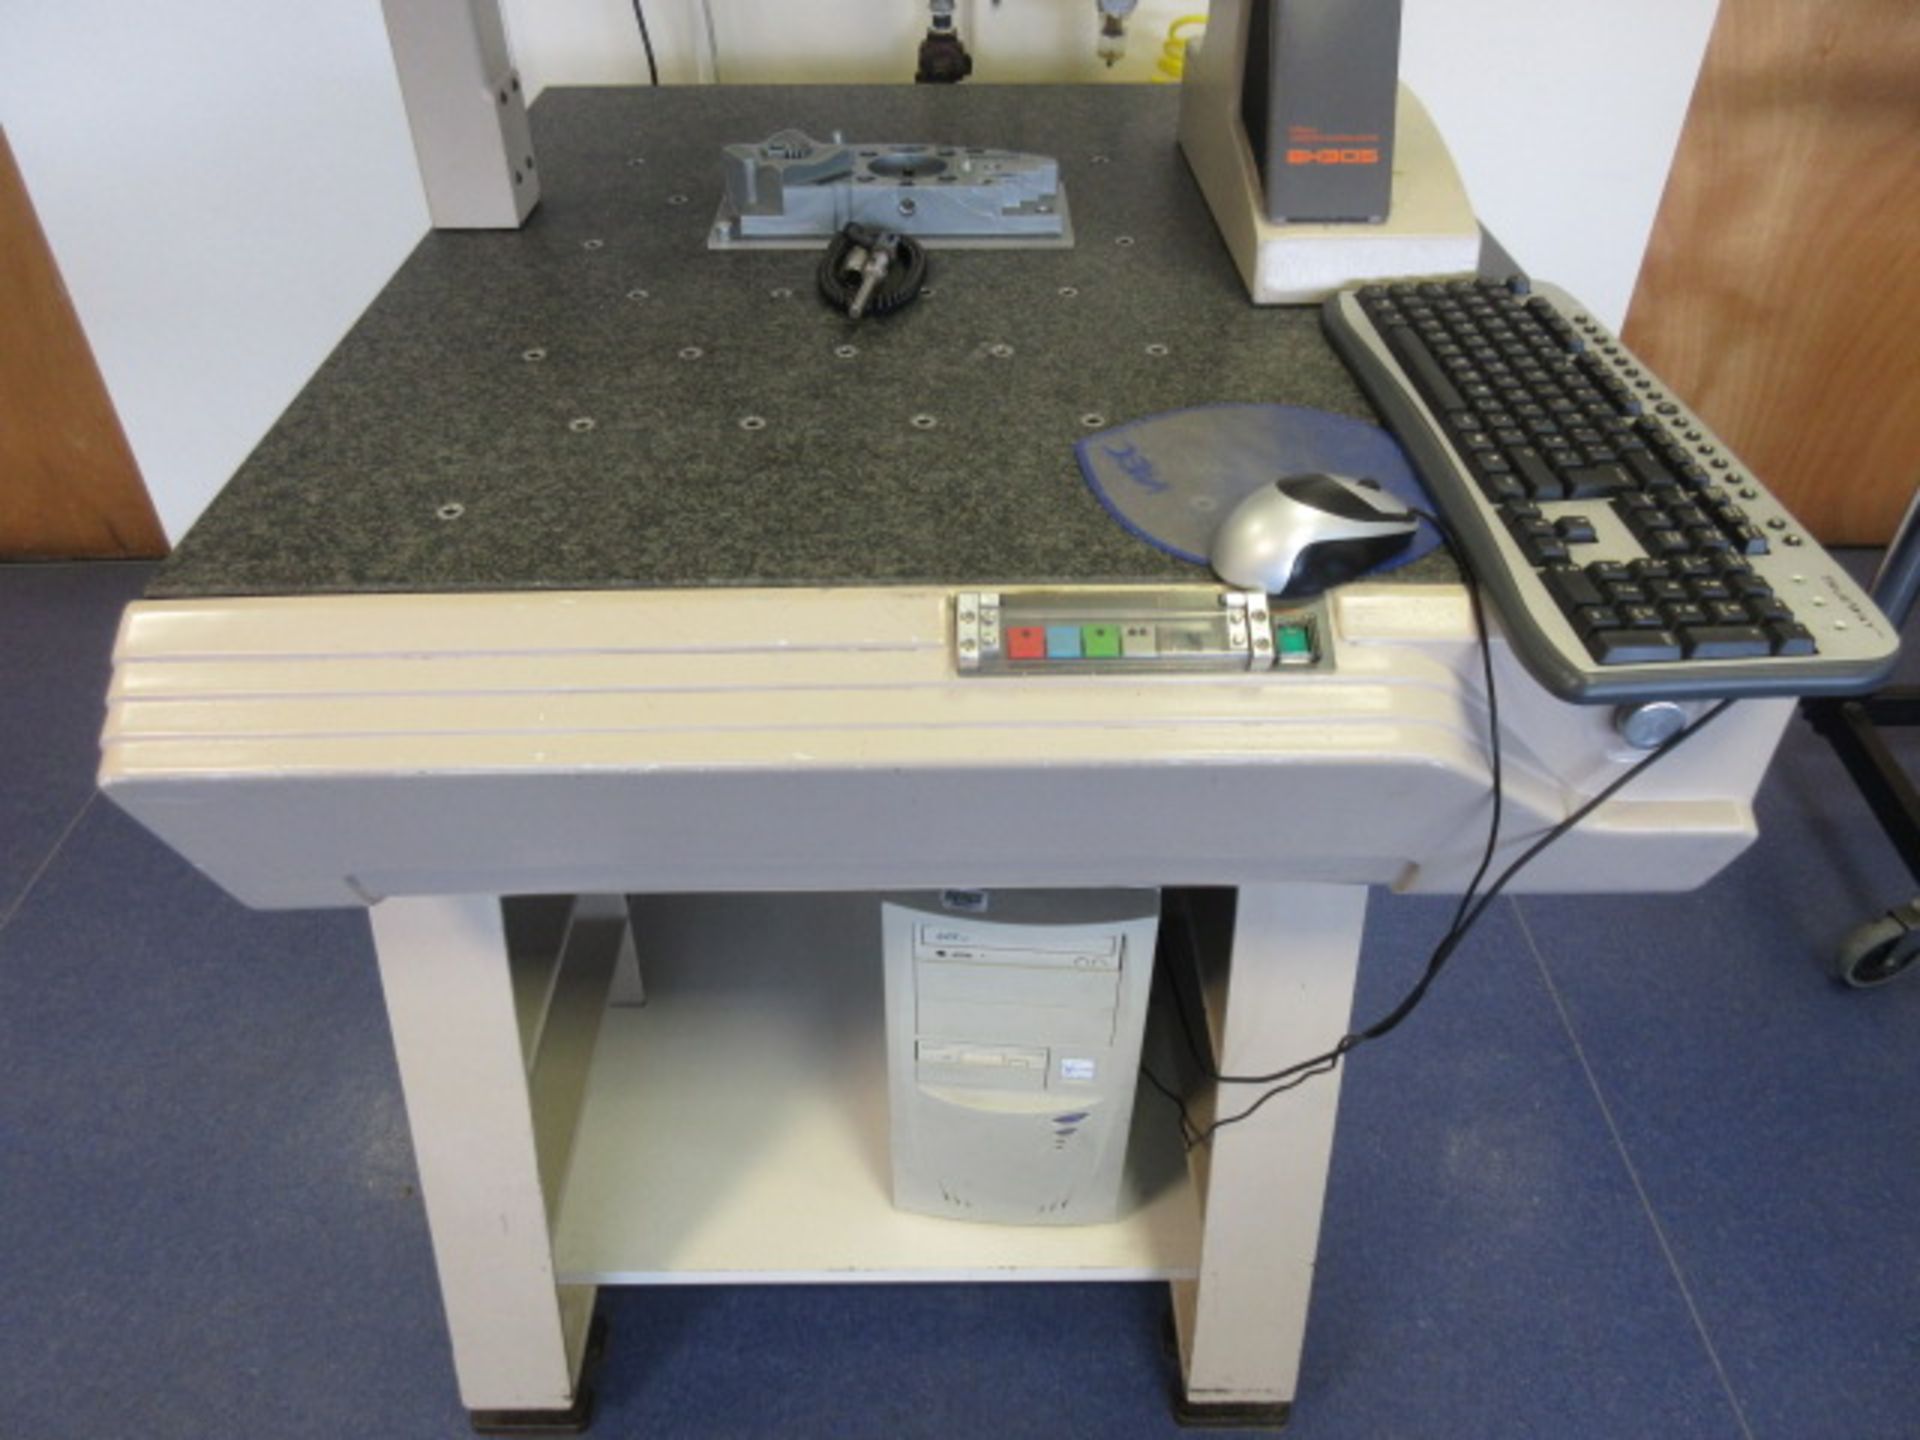 MITUTOYO BH305 CO-ORDINATE MEASURING MACHINE WITH RENISHAW MIH PROBE & COMPUTER. TABLE SIZE 930 MM X - Image 2 of 5